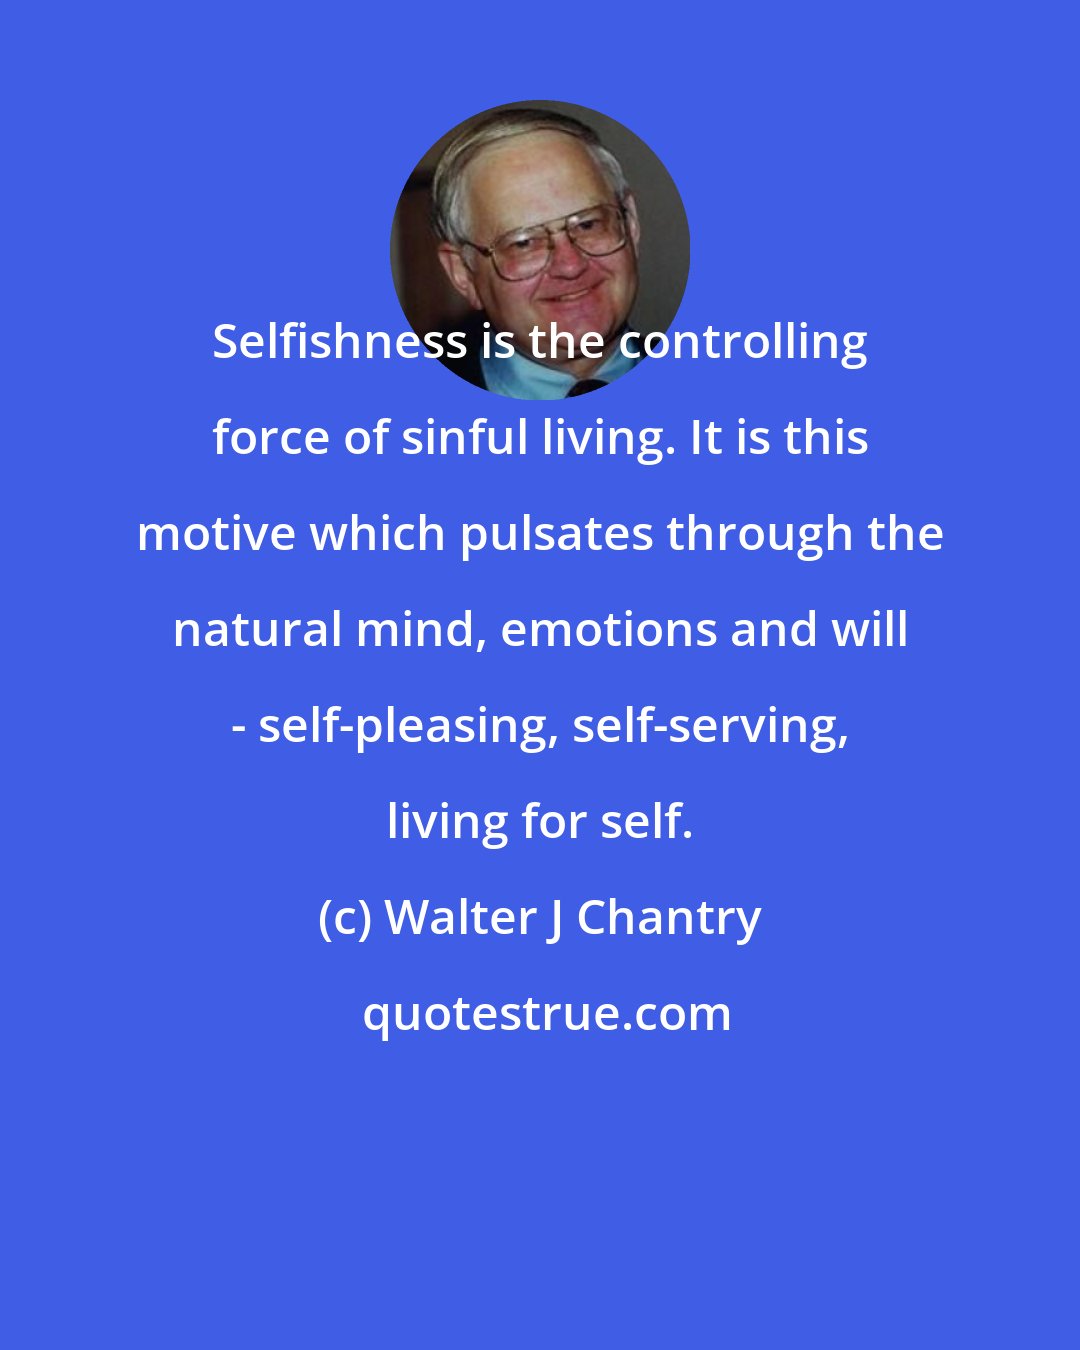 Walter J Chantry: Selfishness is the controlling force of sinful living. It is this motive which pulsates through the natural mind, emotions and will - self-pleasing, self-serving, living for self.